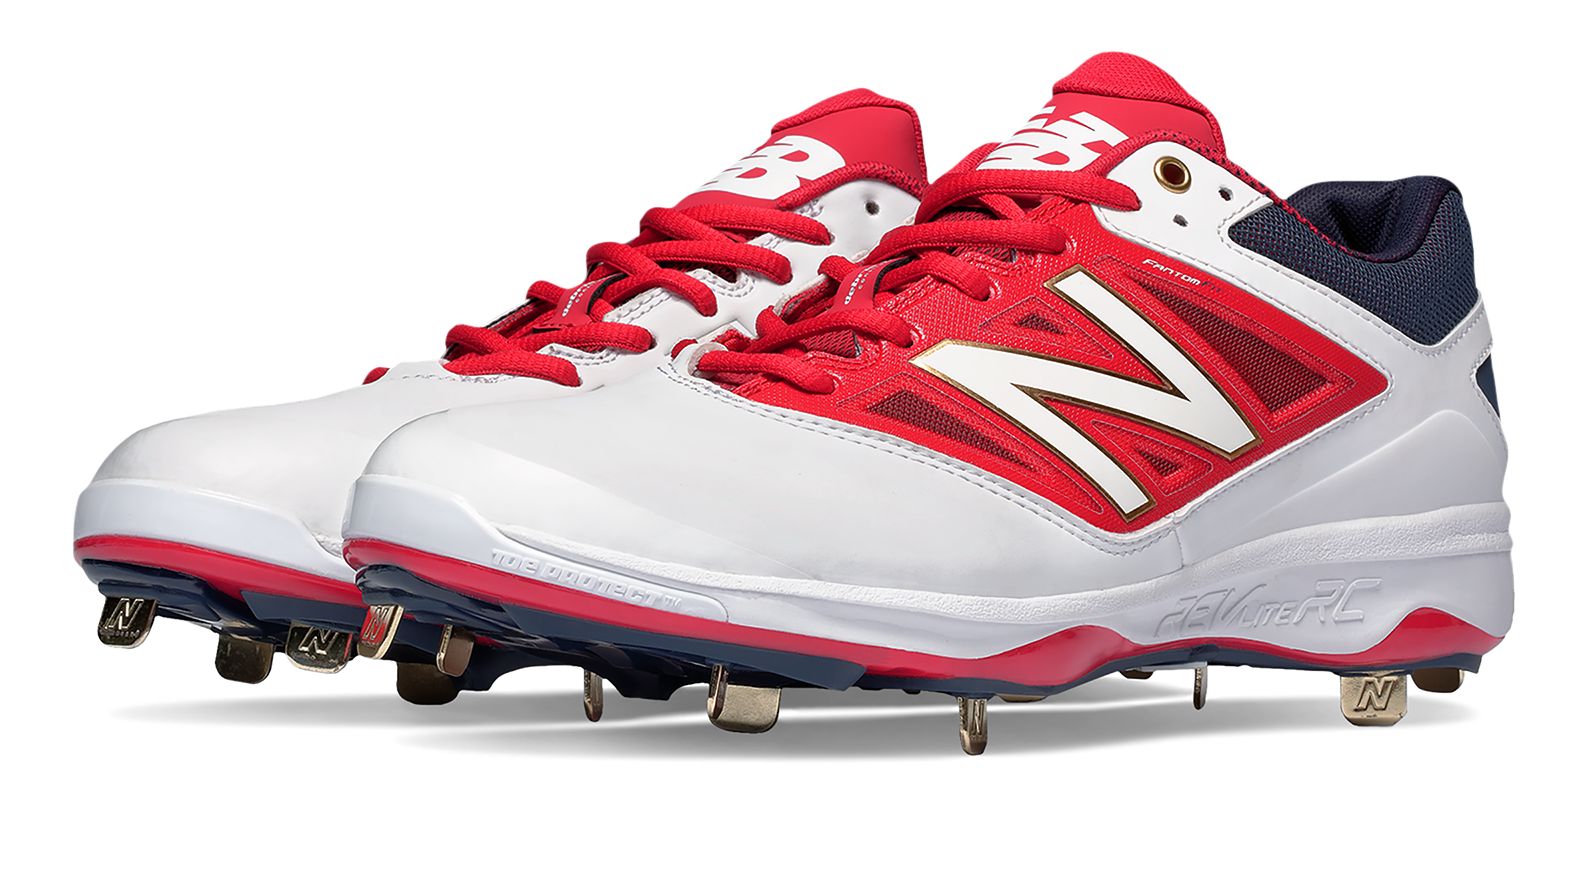 New Balance Baseball Cleats Red White And Blue Off 70 Cheap Price